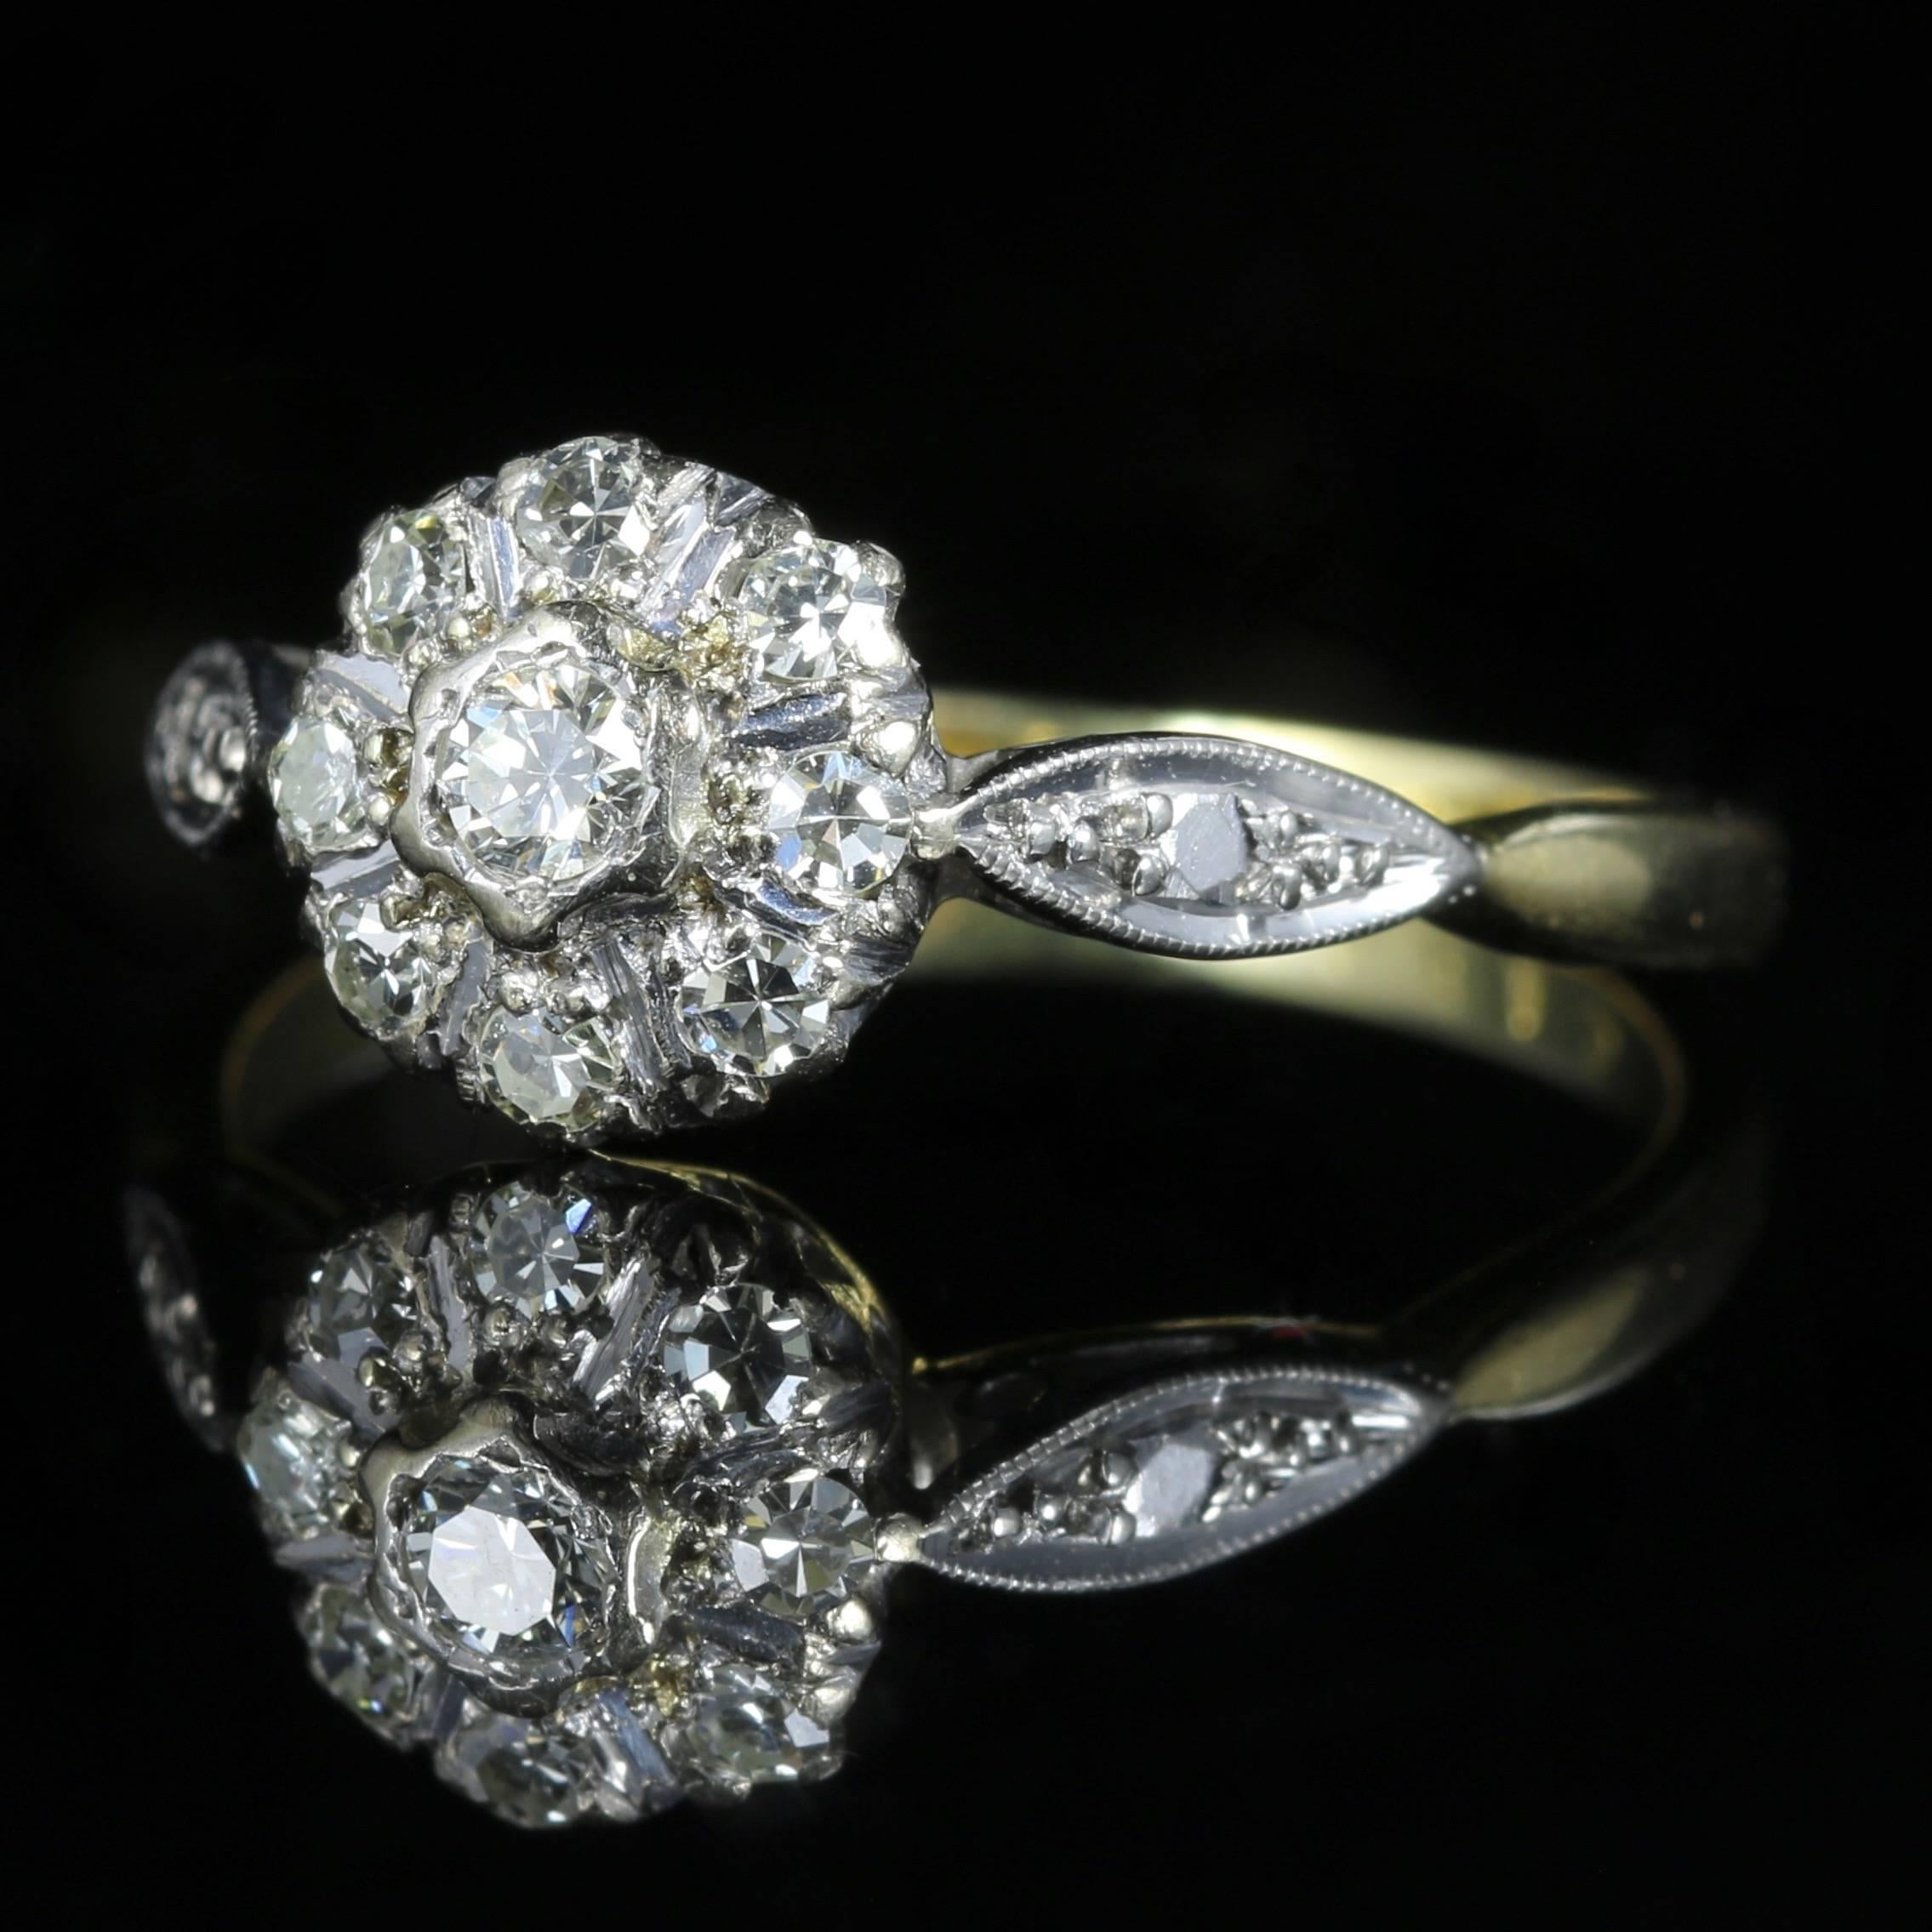 This stunning Antique 18ct yellow Gold and Platinum ring boasts a cluster of Diamonds that are all original to the ring. Circa 1915

It is stamped 18ct but this is quite worn. 

This lovely ring is set with an approx. of 0.80ct of Diamonds. They are